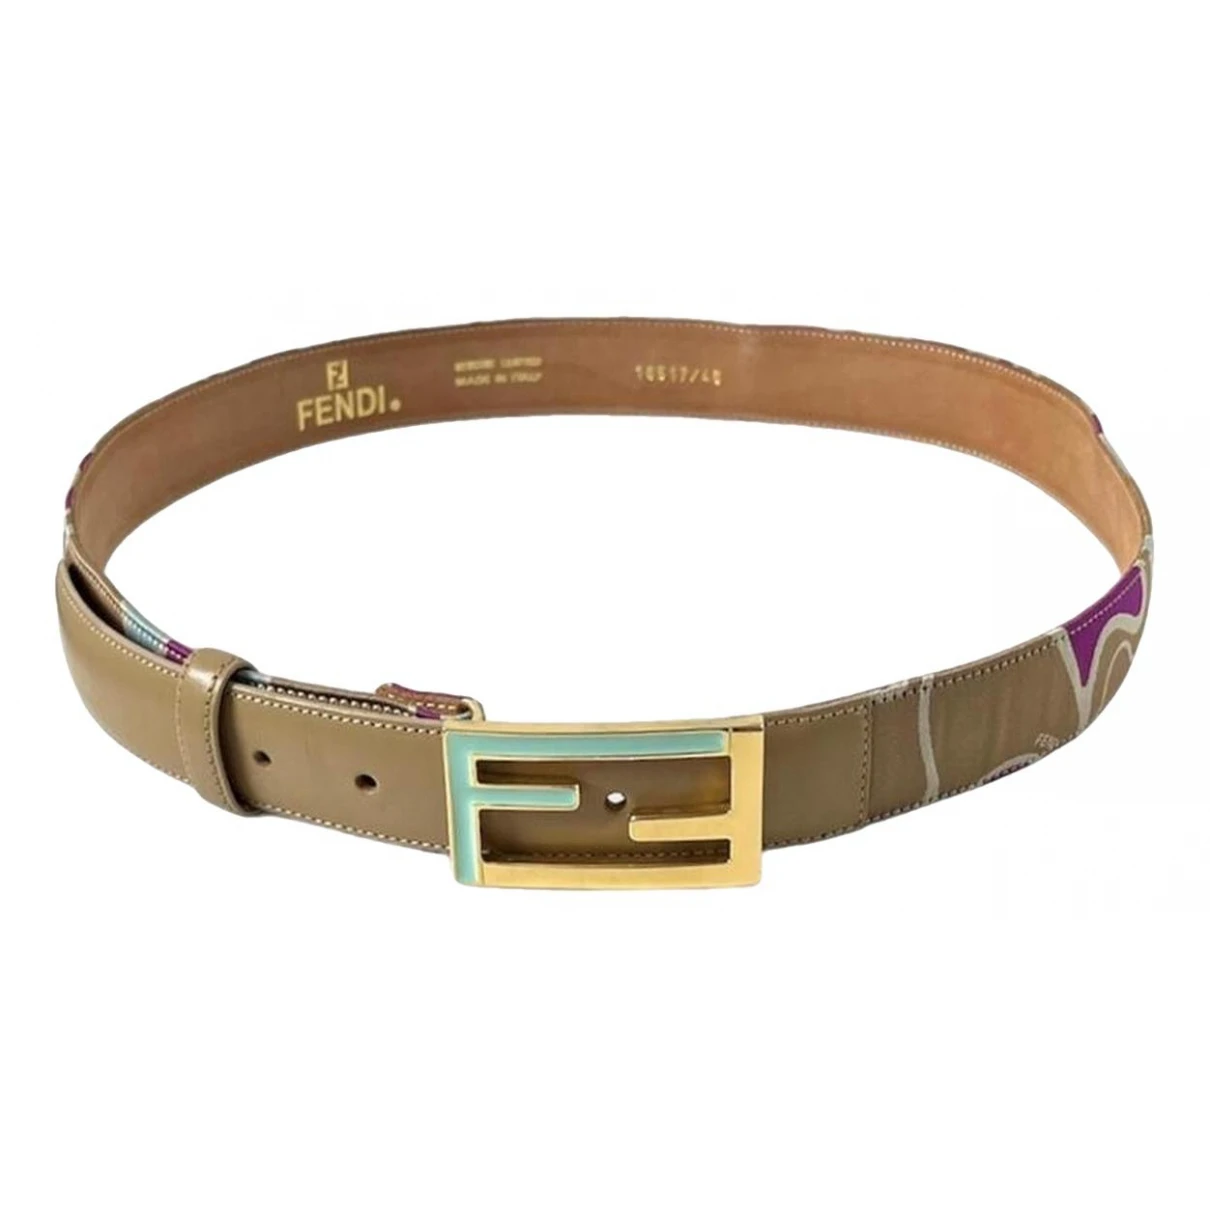 accessories Fendi belts for Female Cloth 70 cm. Used condition